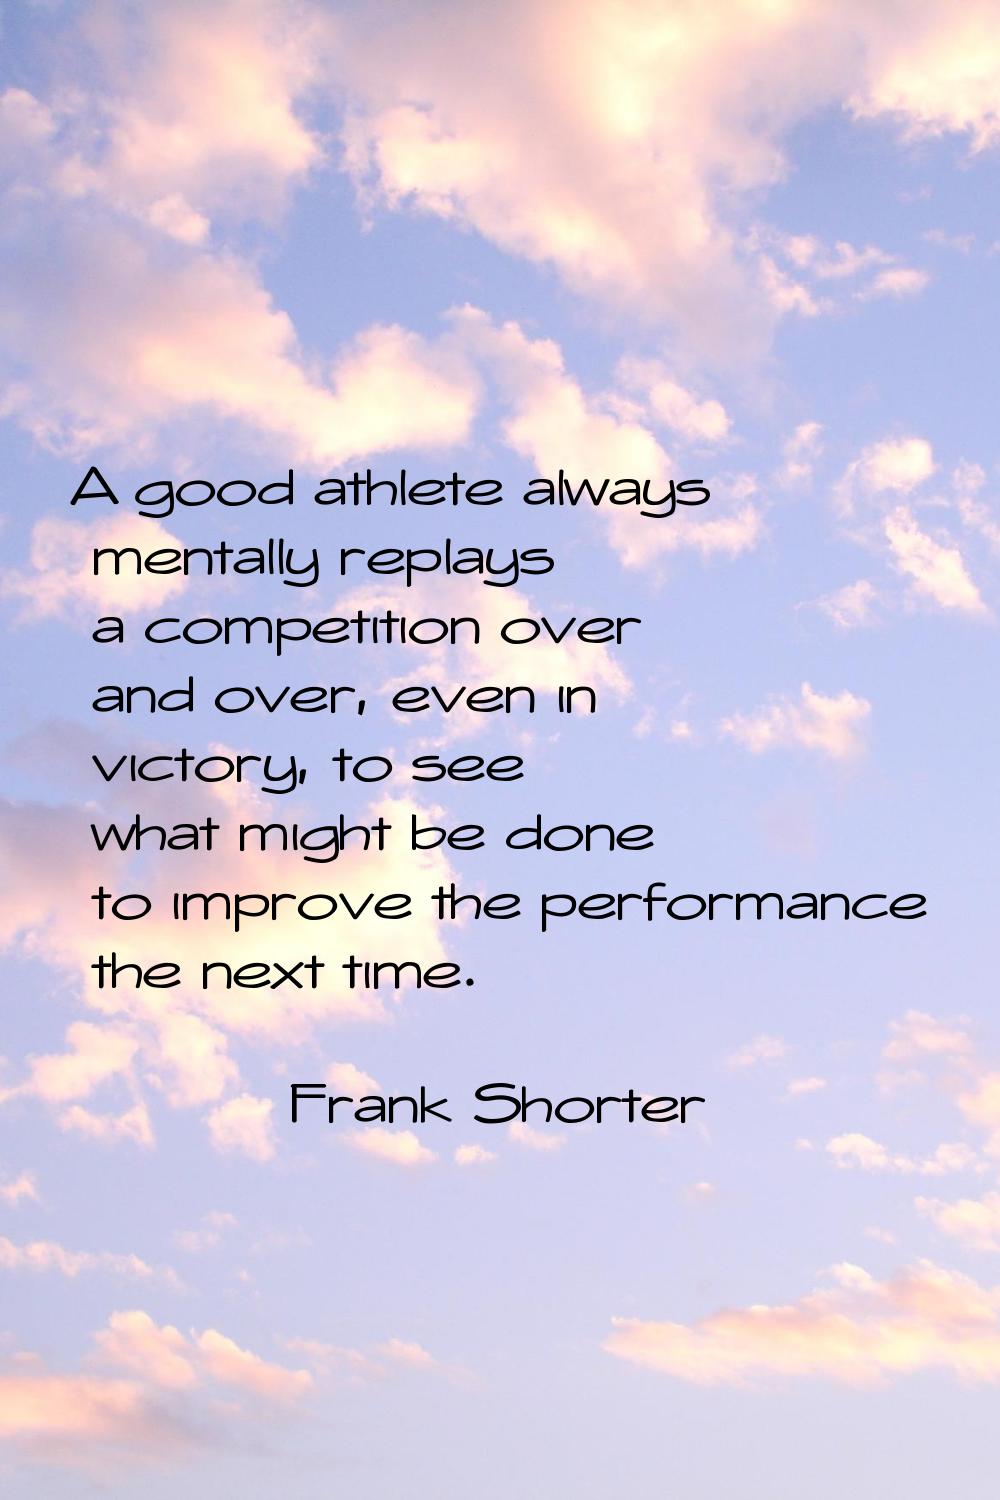 A good athlete always mentally replays a competition over and over, even in victory, to see what mi